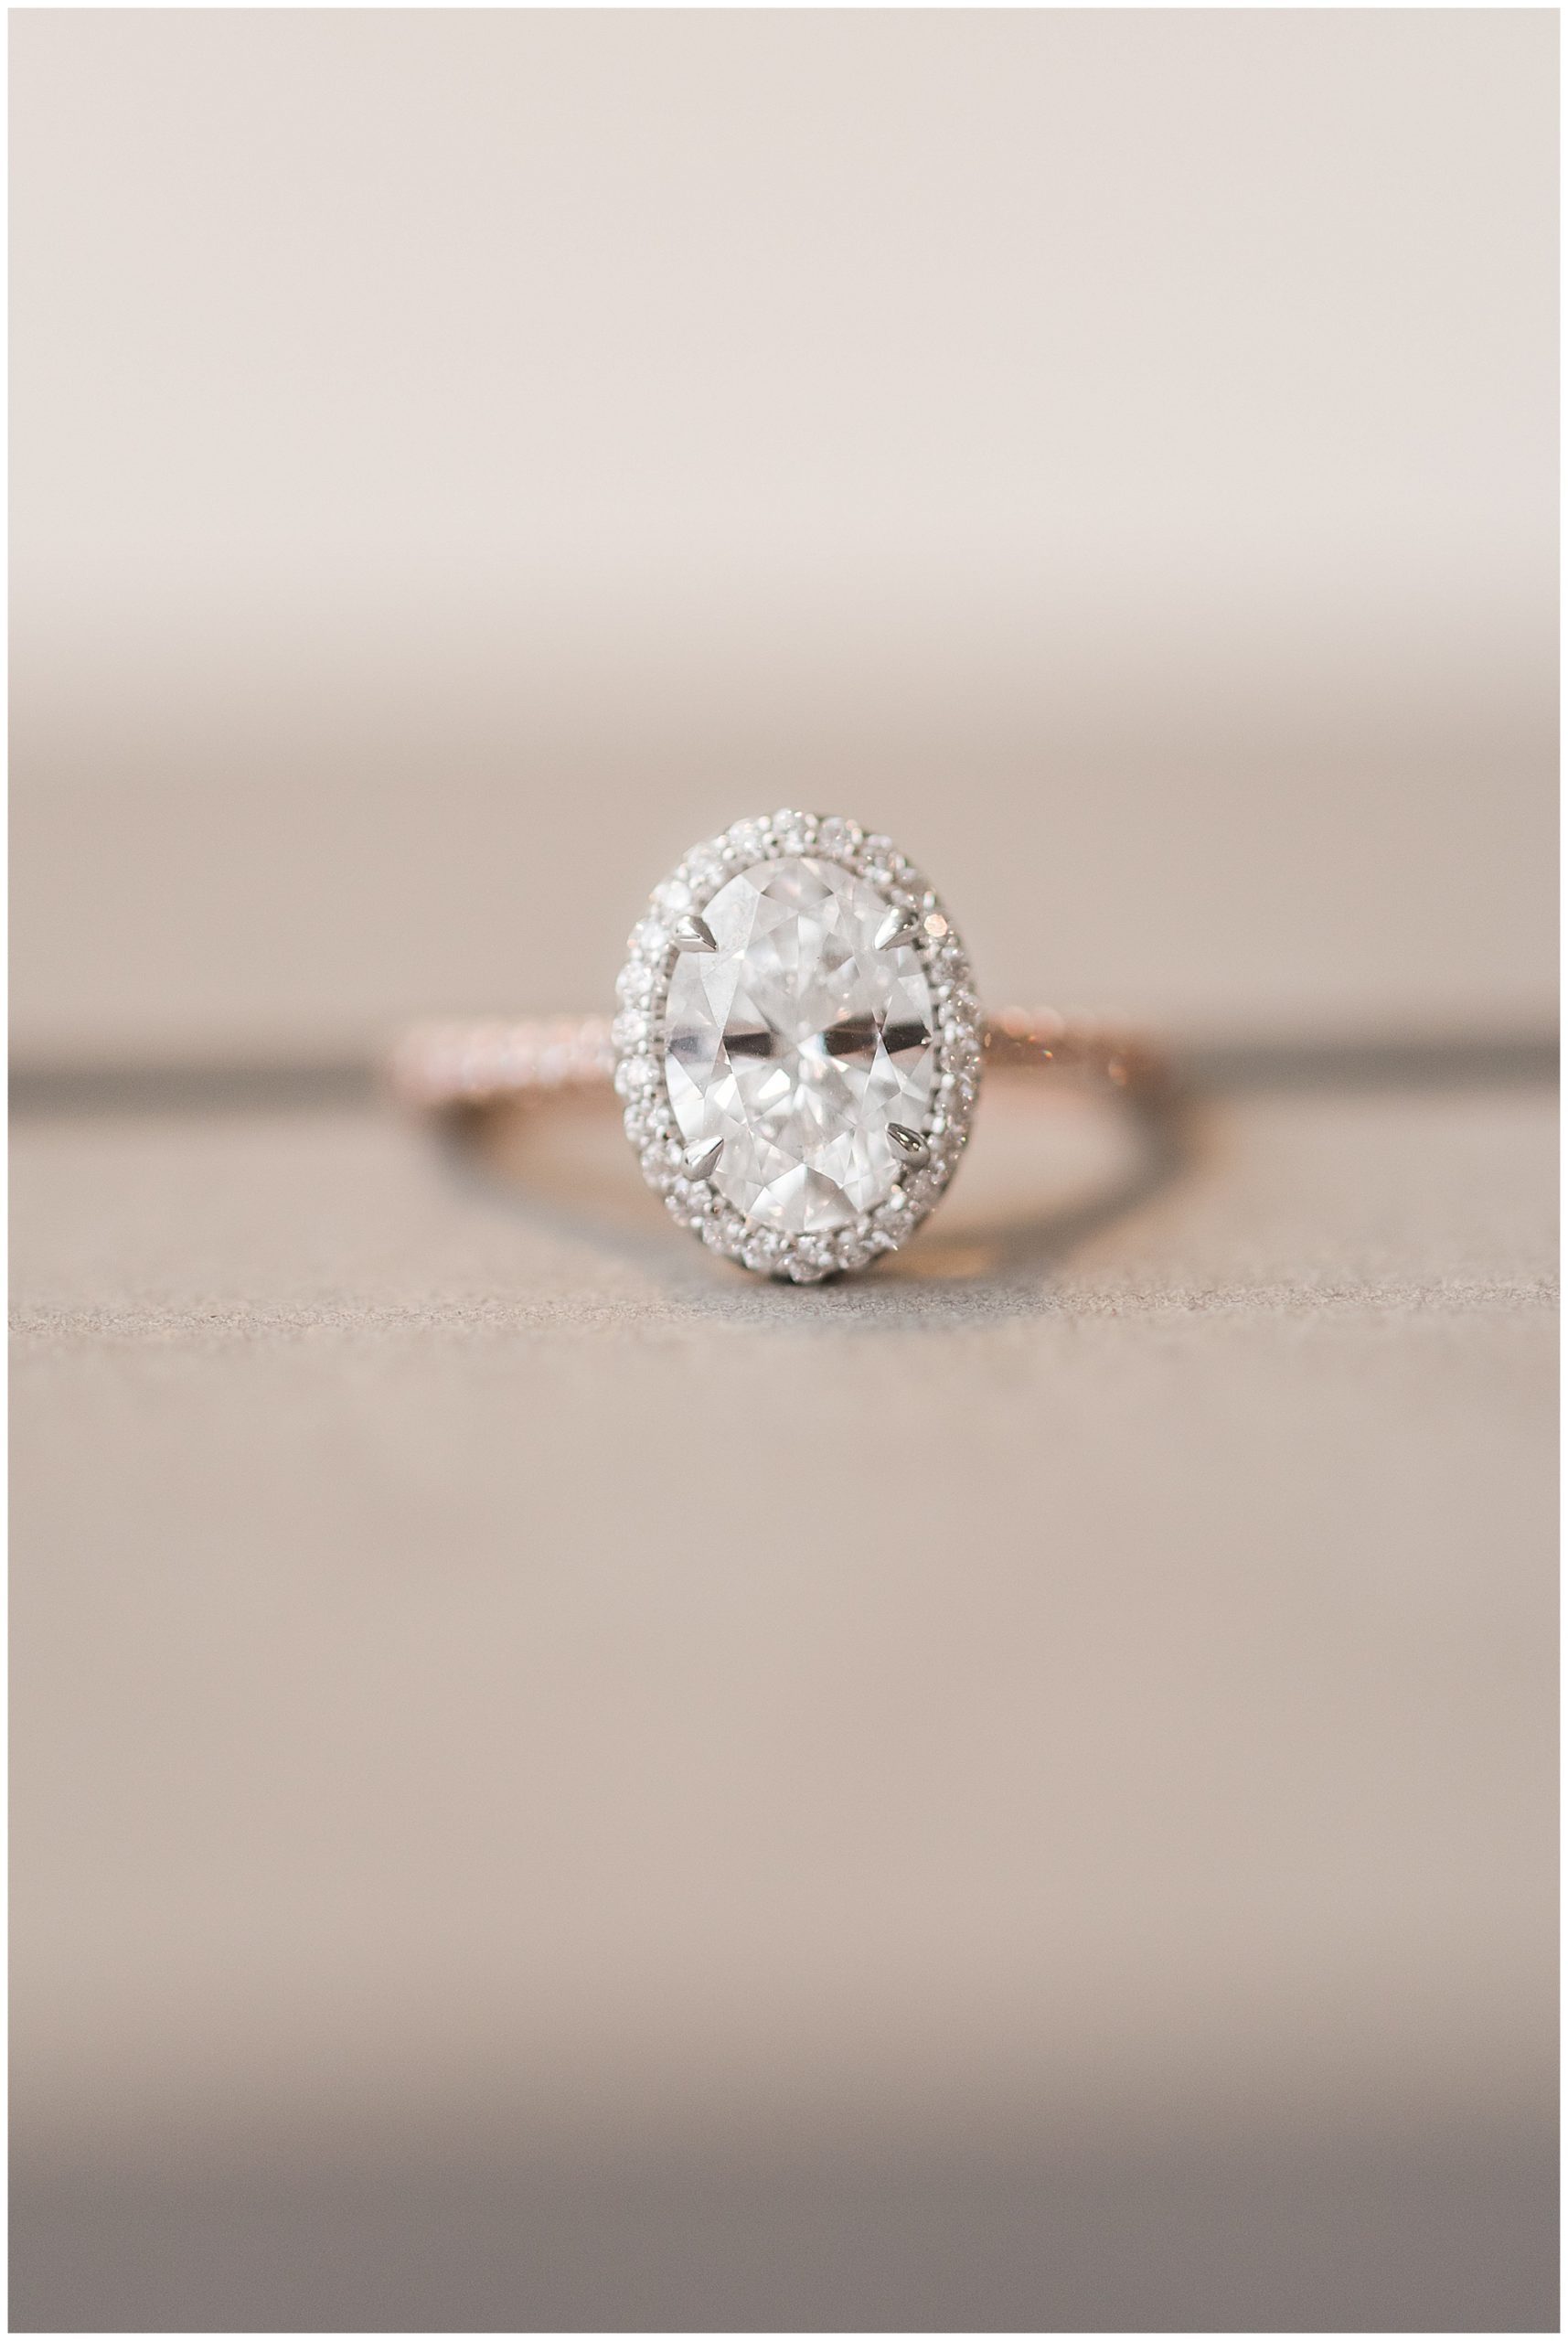 Light & Airy engagement ring